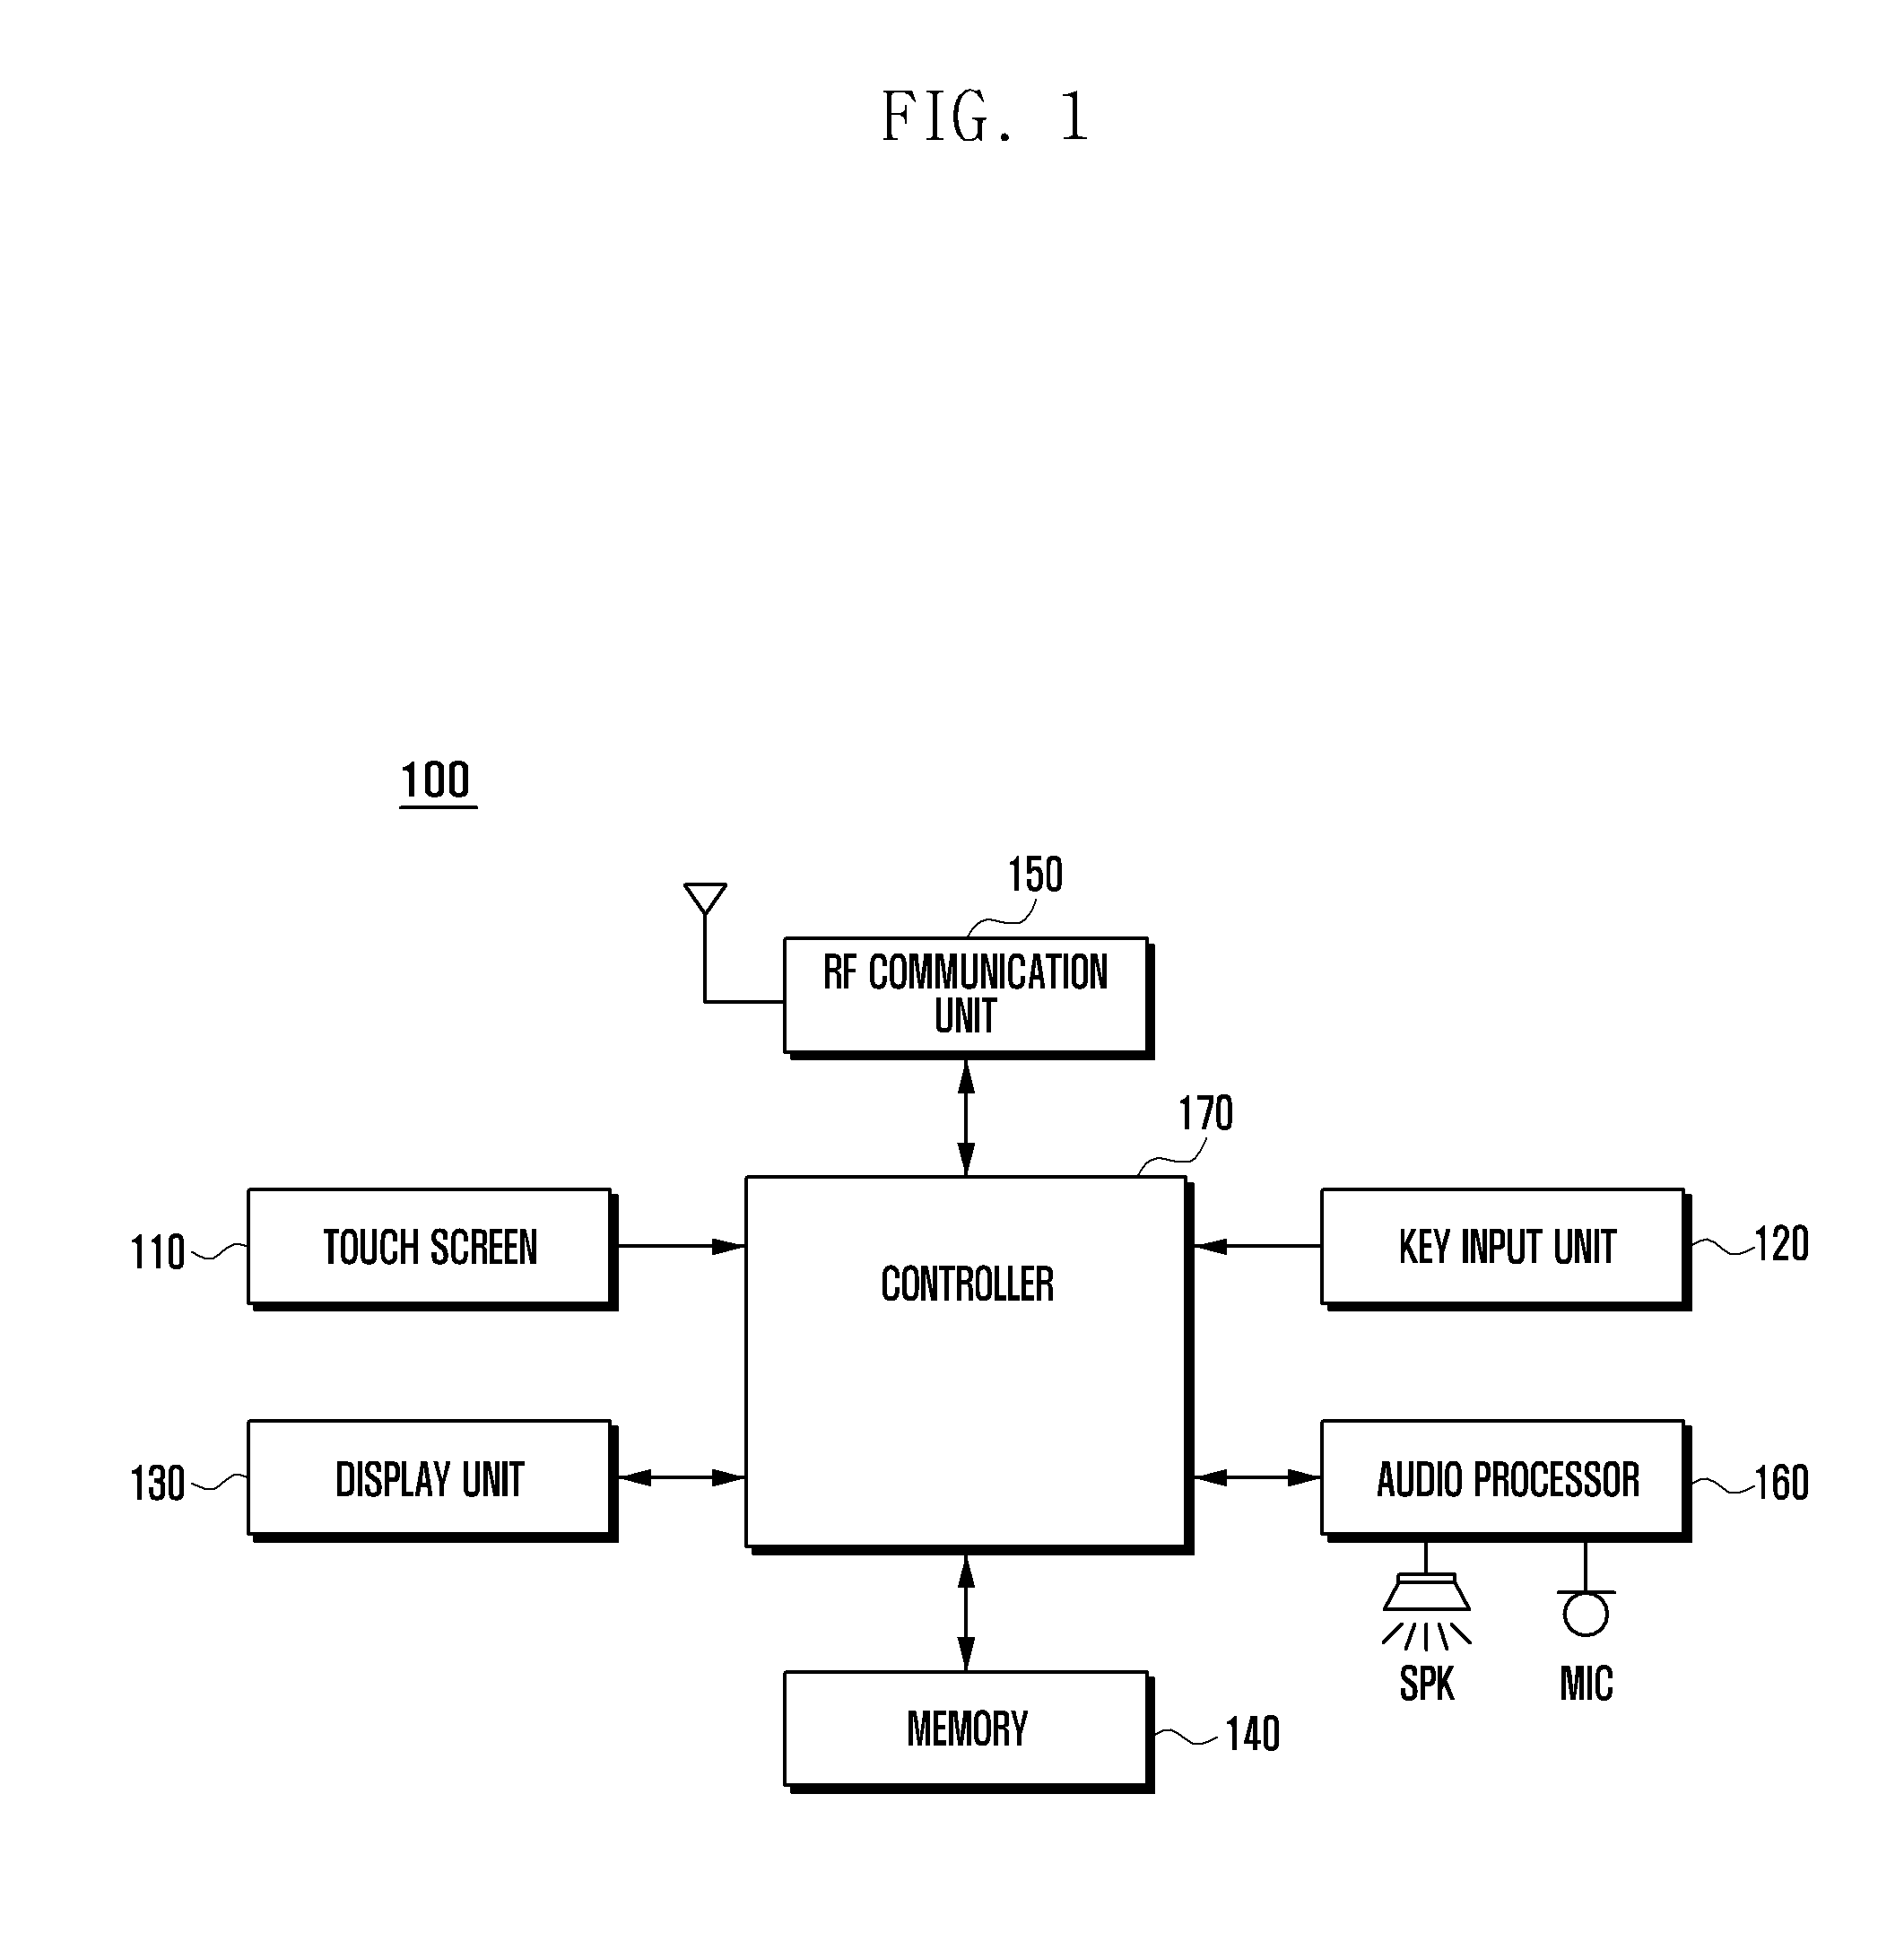 Method and apparatus for displaying keypad in terminal having touch screen